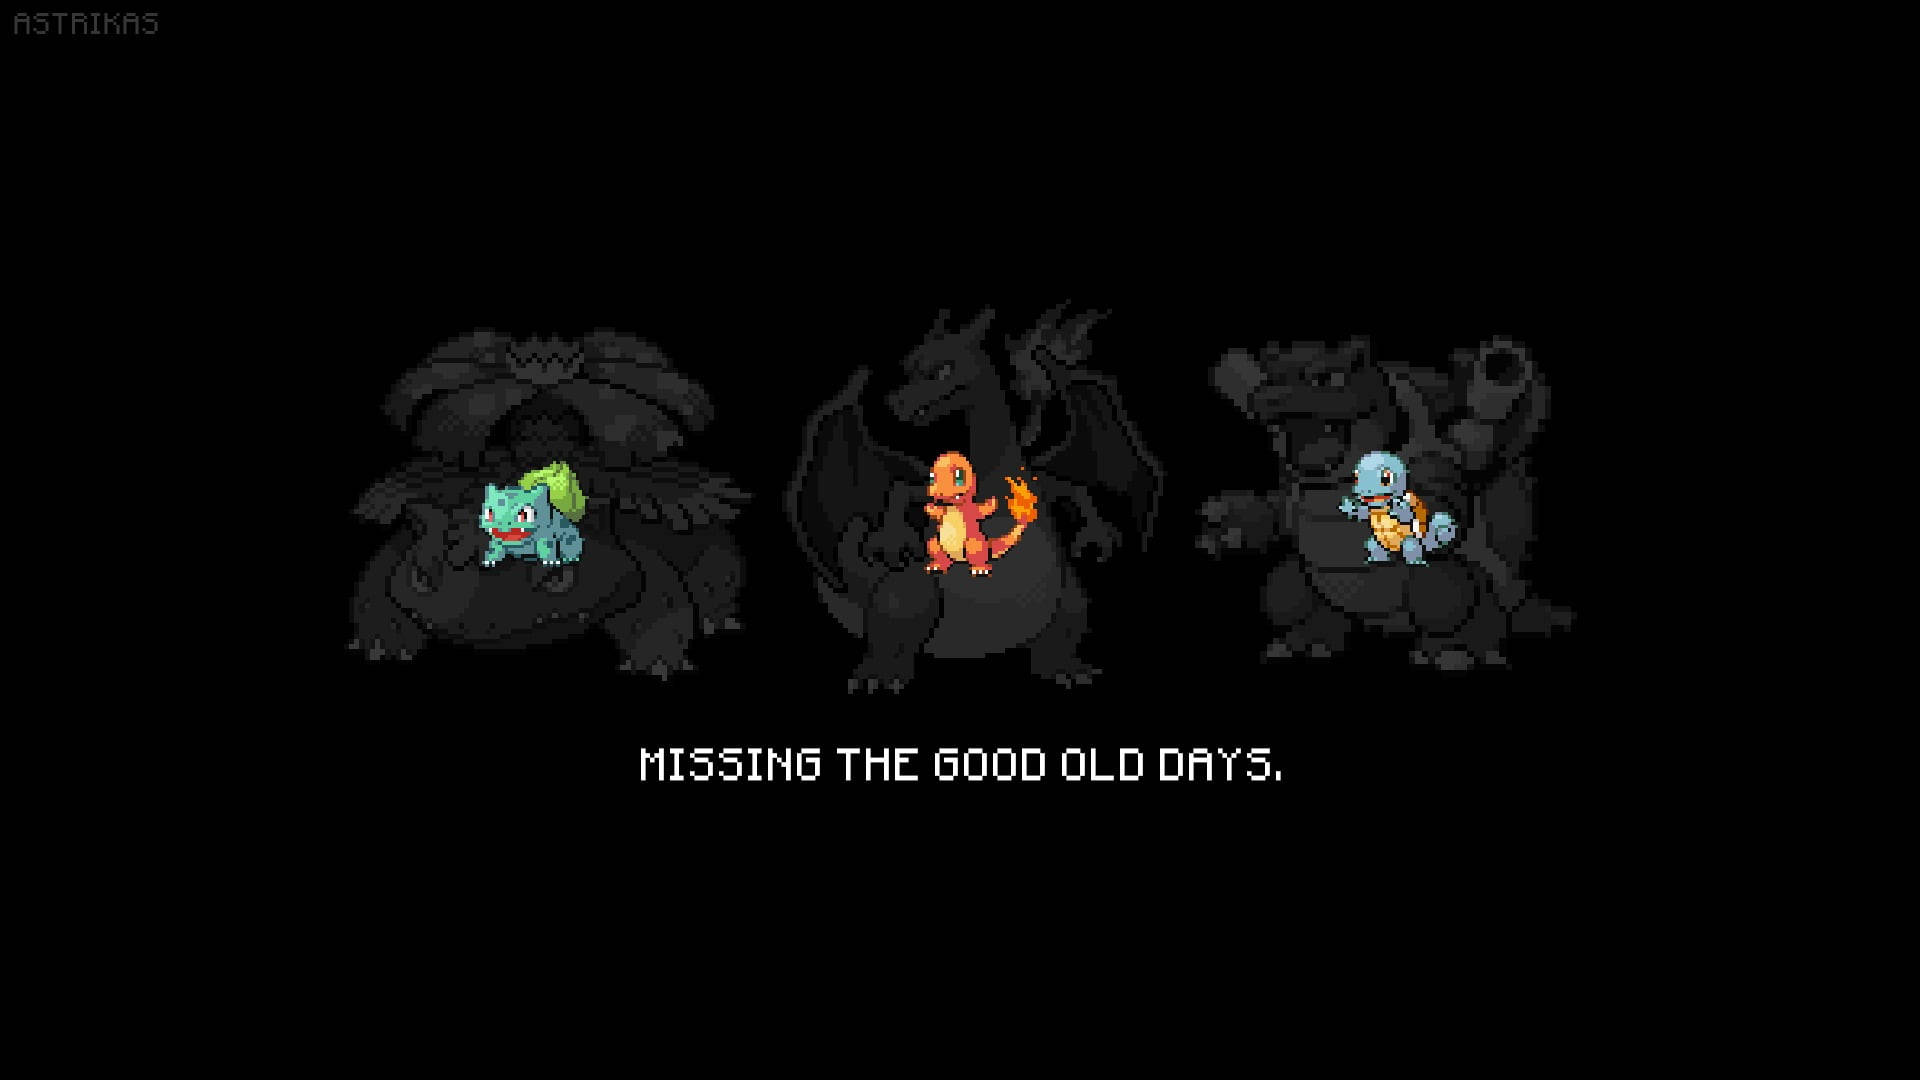 Enjoying the Good Old Days with Charizard Wallpaper